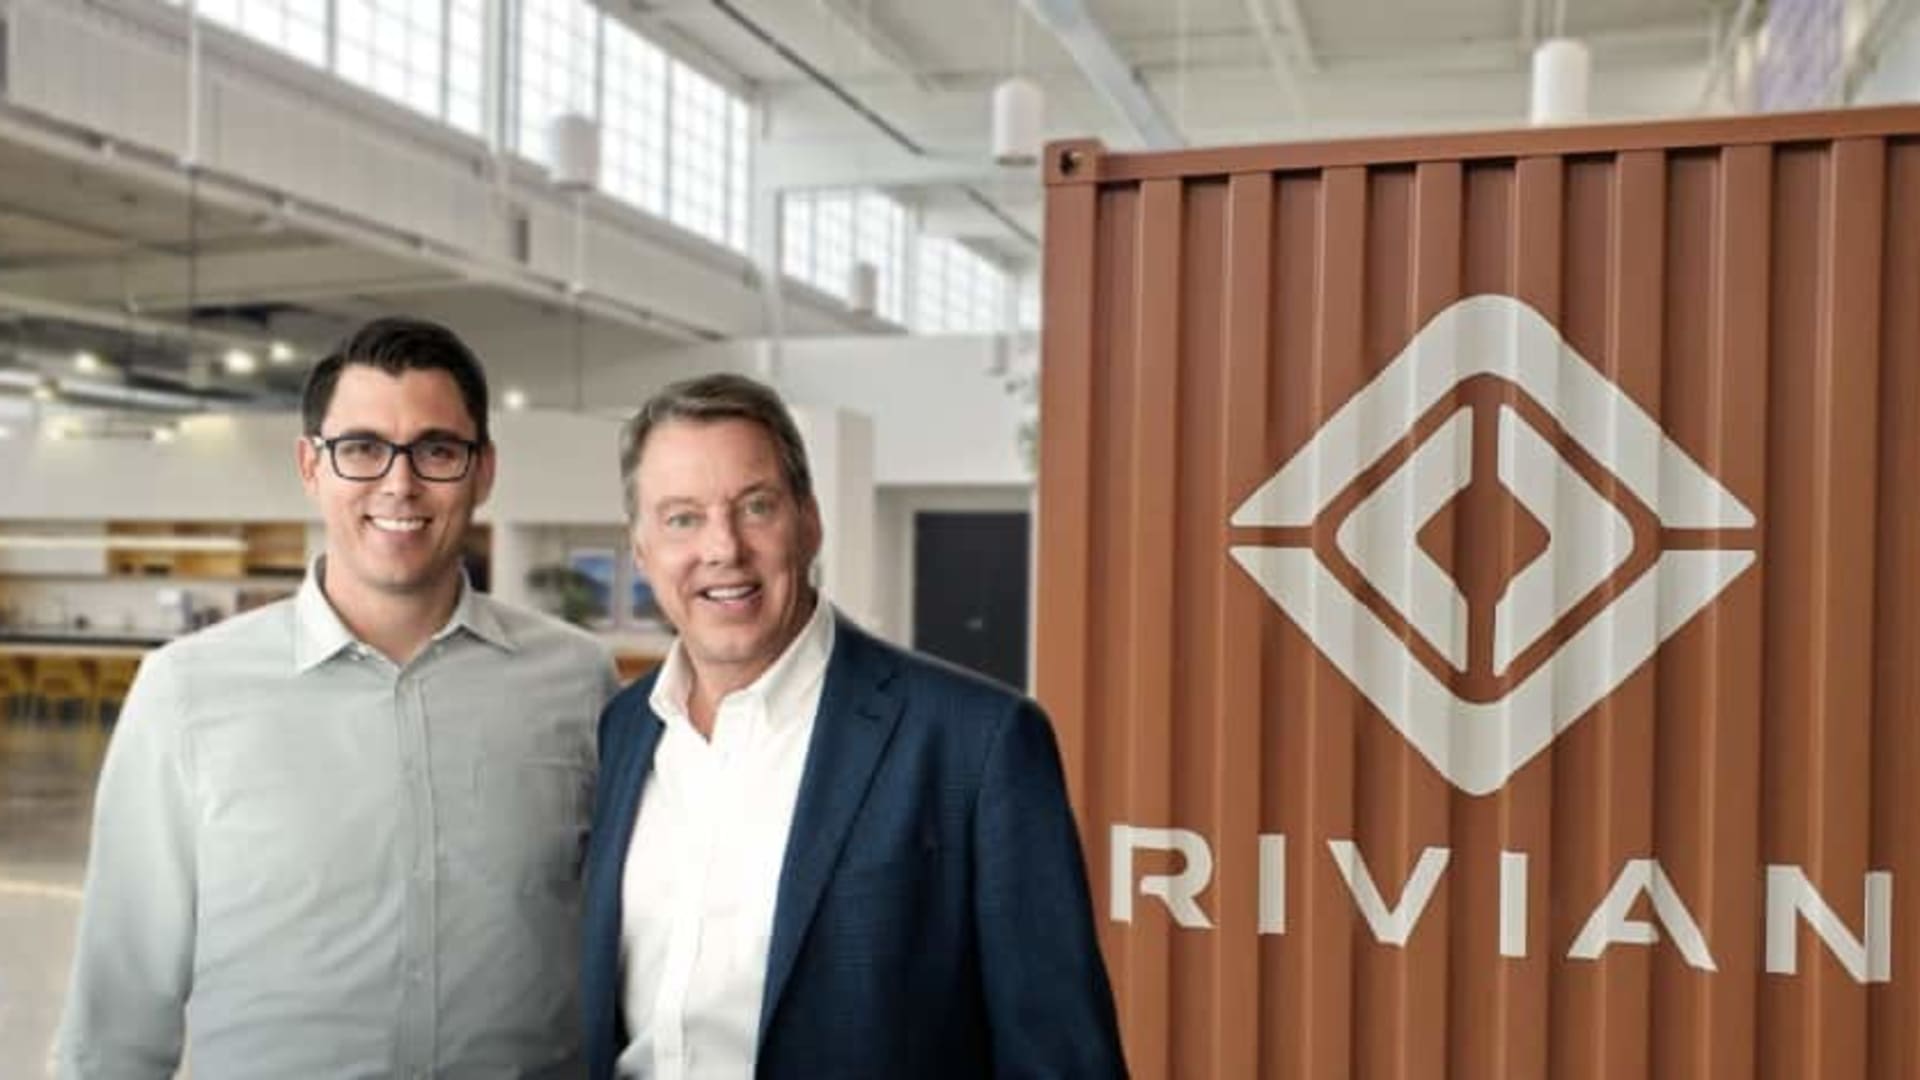 Ford sold most of its Rivian stake last year